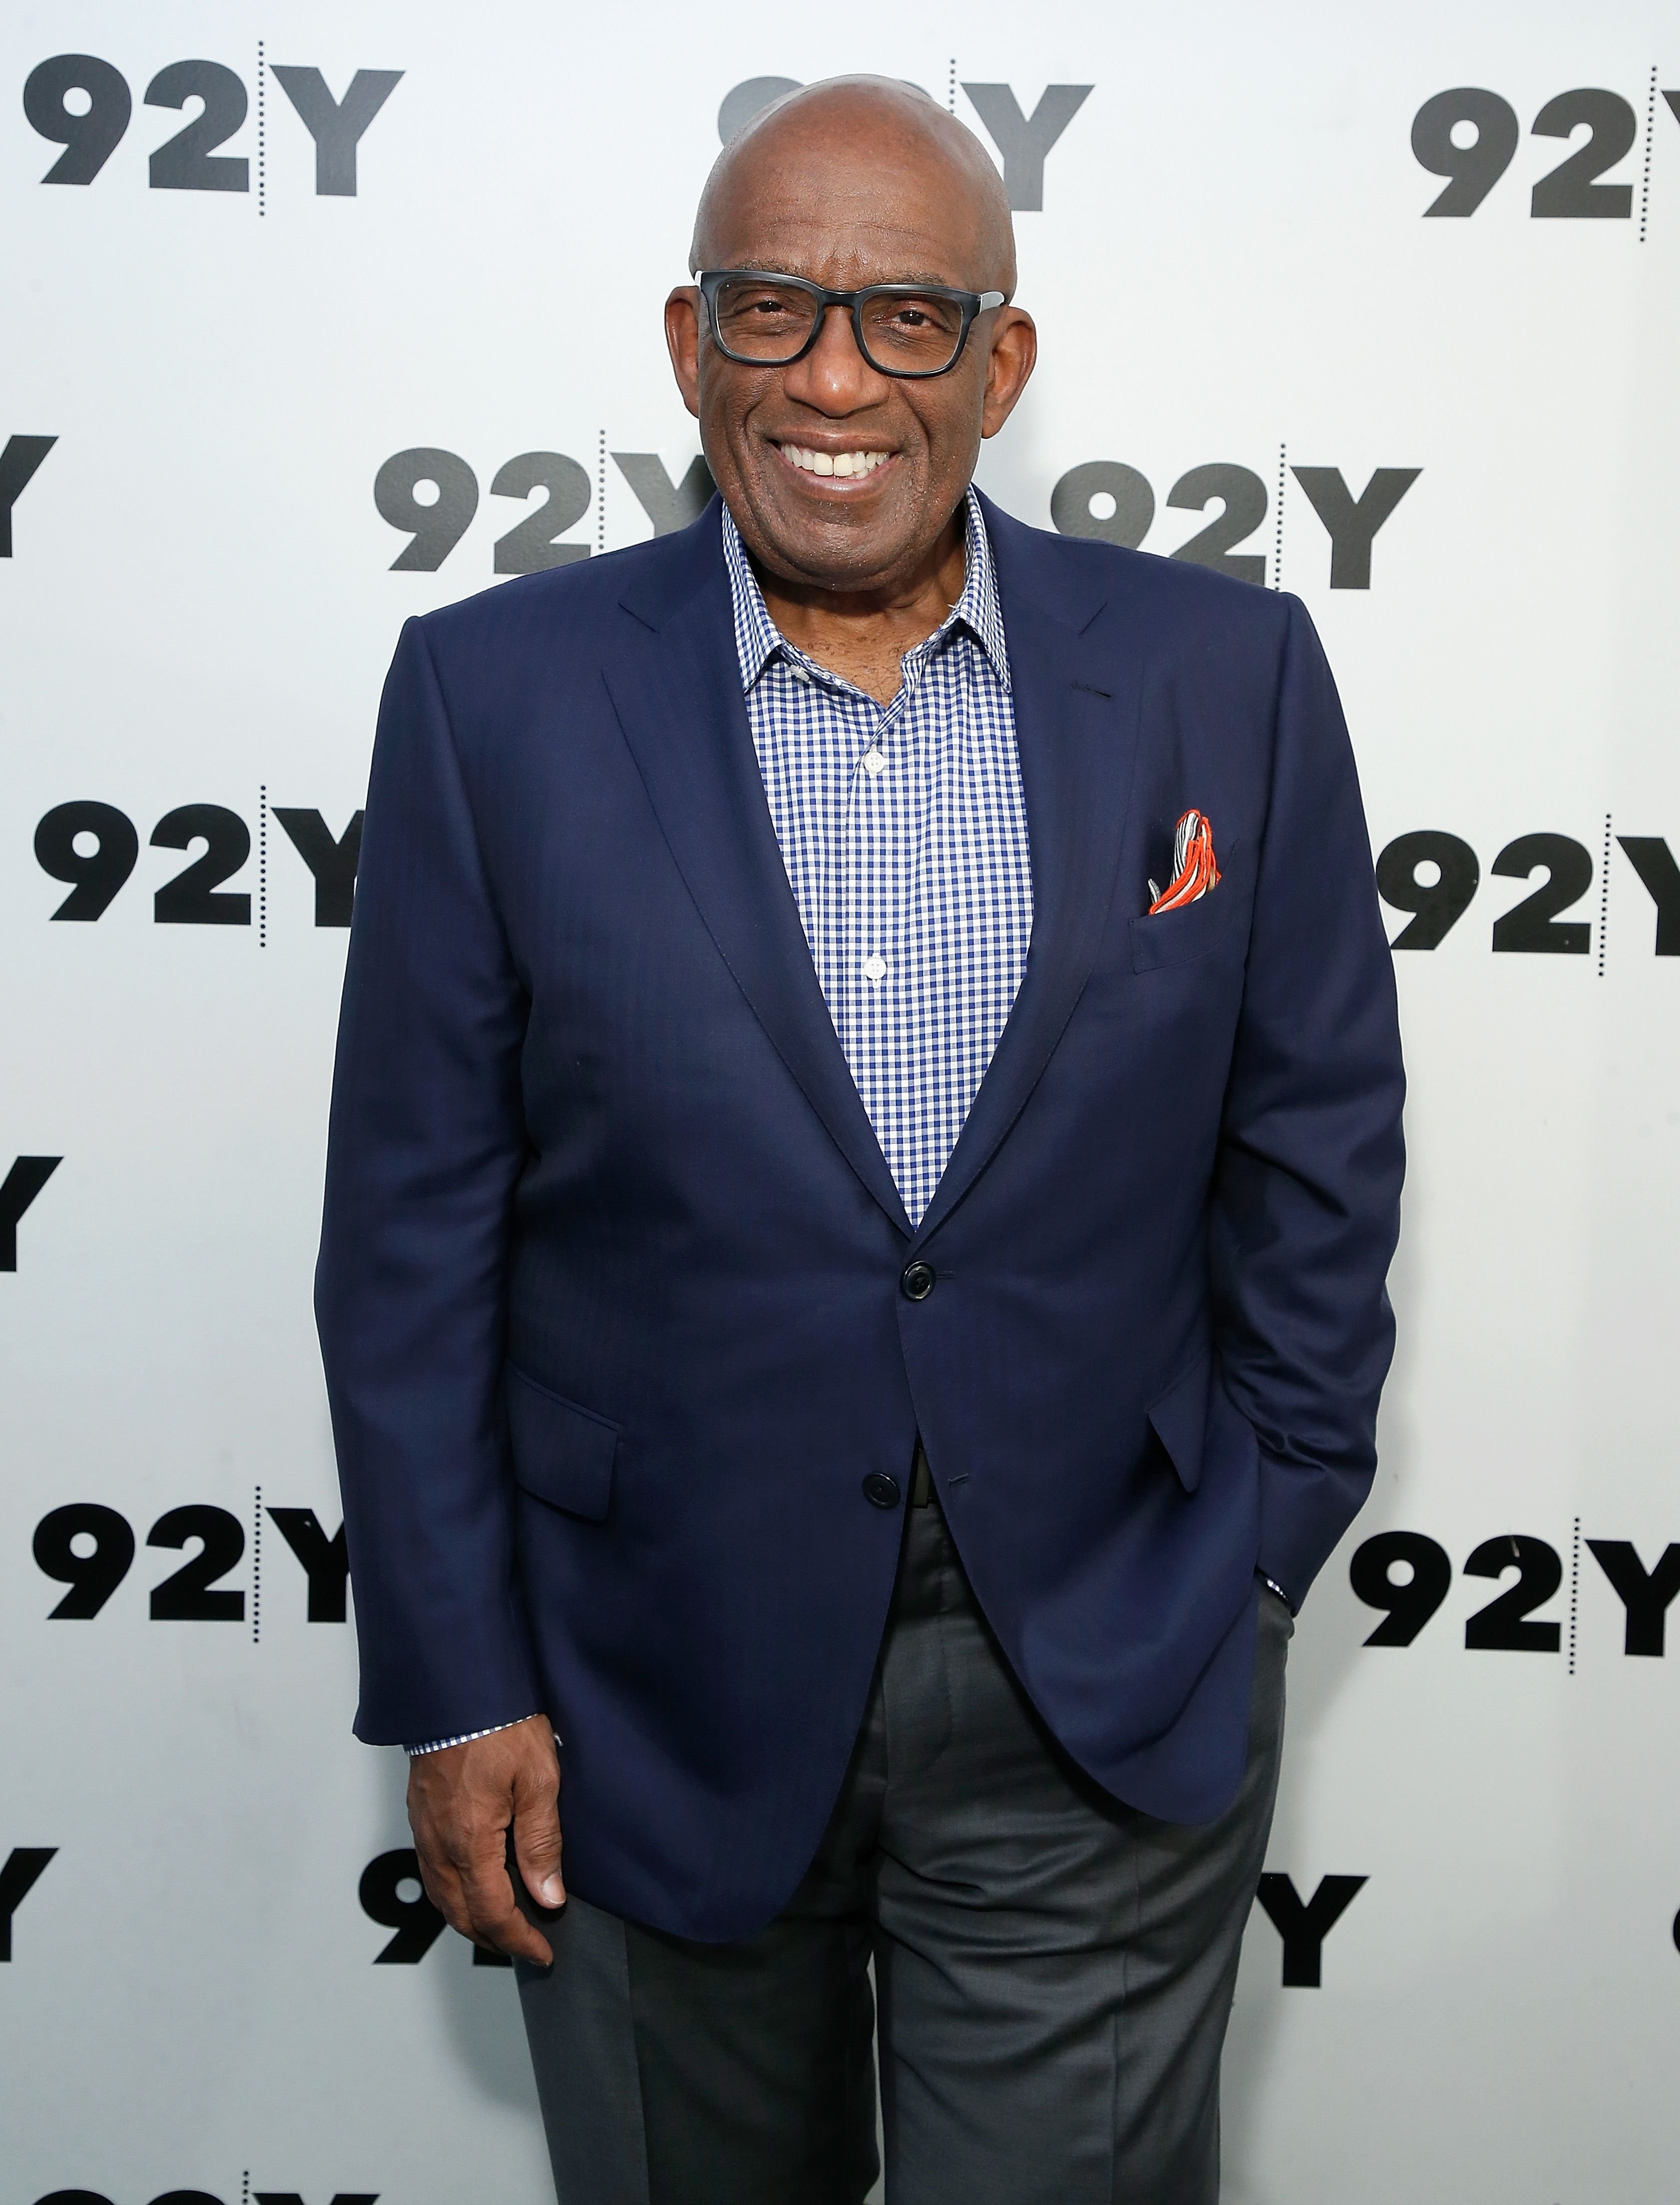 Al Roker at the Natalie Morales in conversation with Al Roker event at 92nd Street Y on April 16, 2018 | Photo: Getty Images